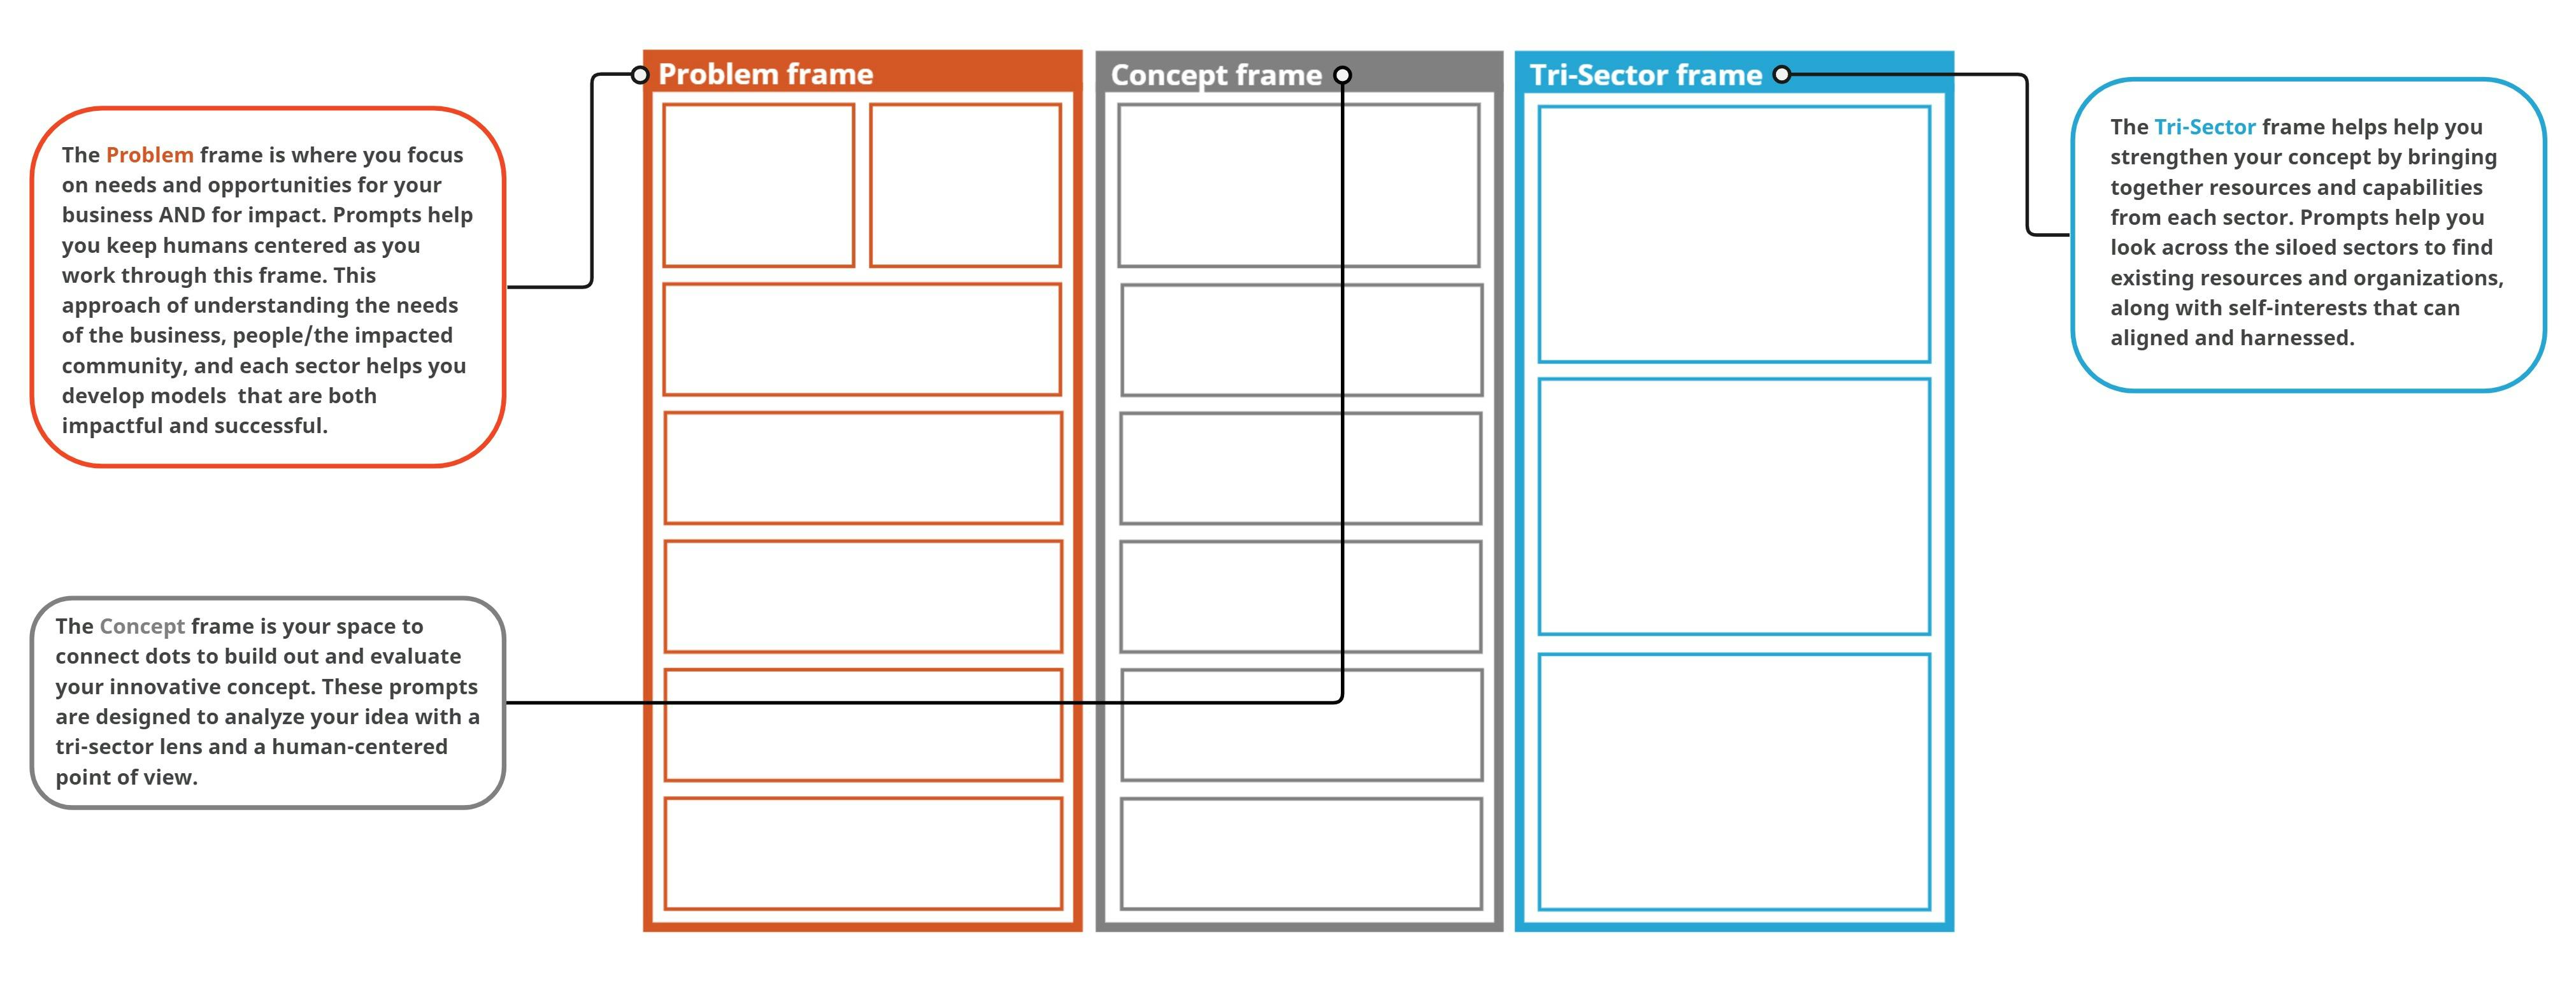 Screenshot of Trisector Innovation Canvas 